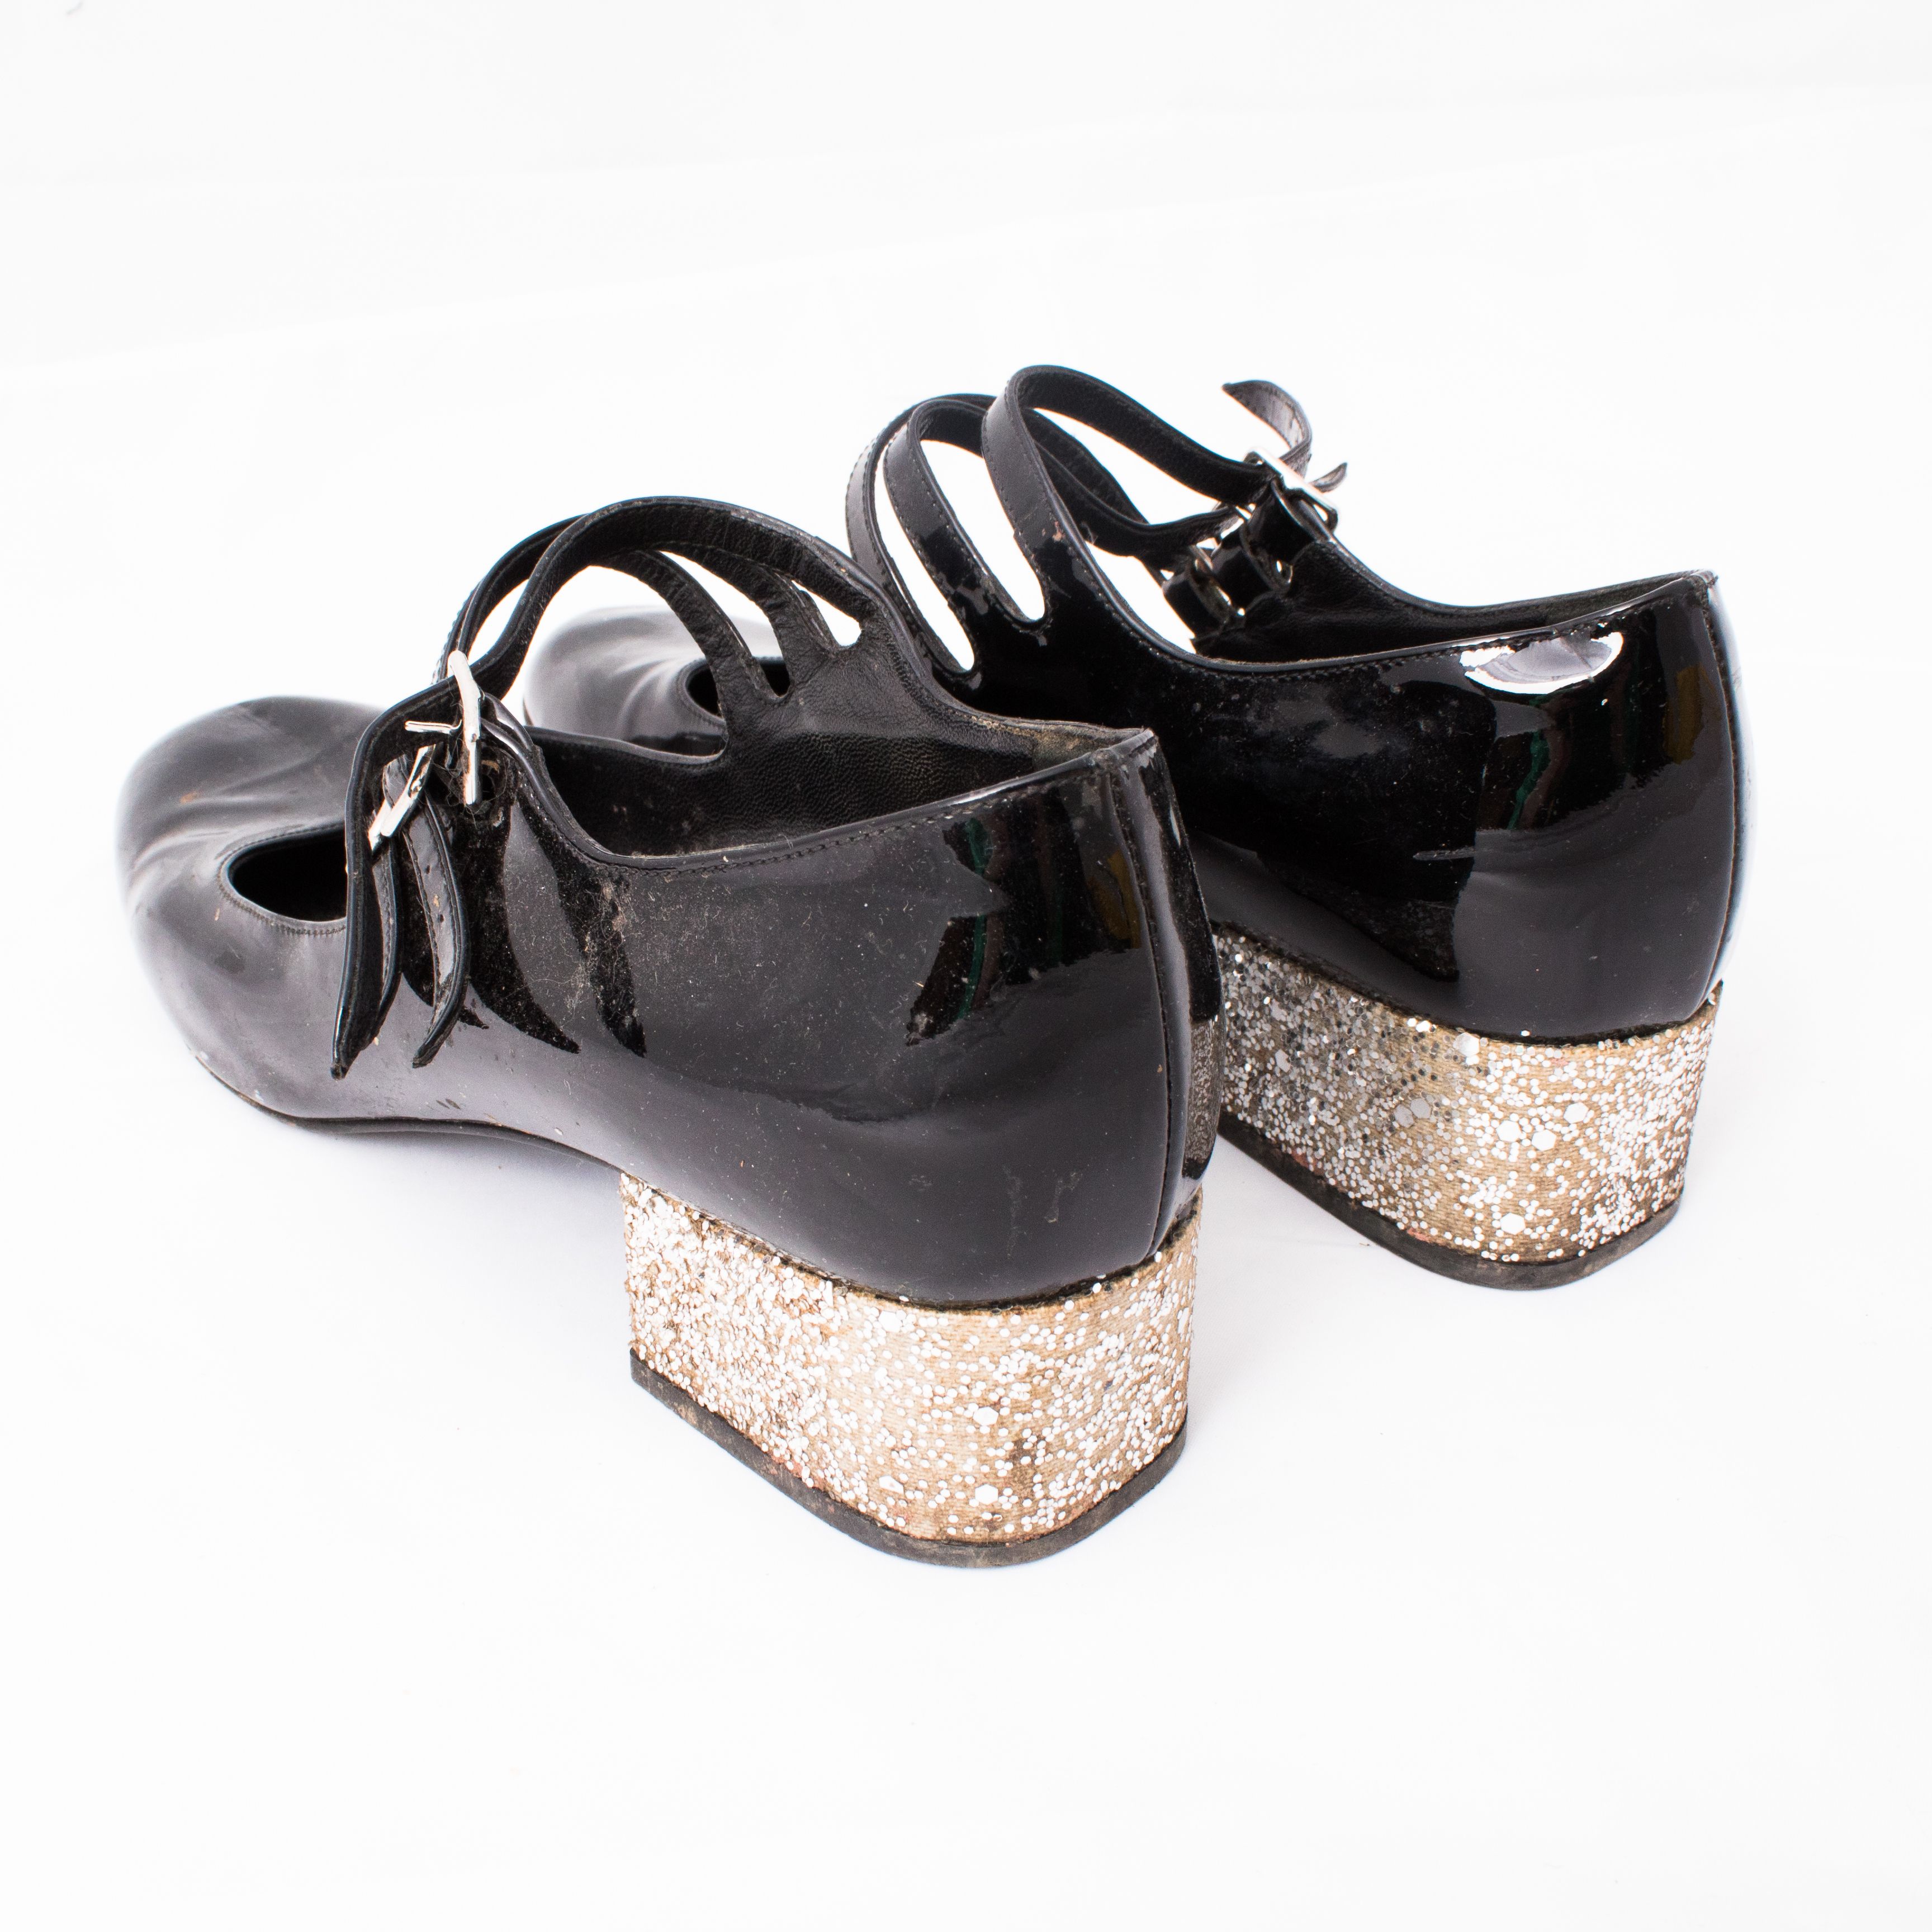 Saint Laurent Patent and Glitter Mary Janes by Leila Rahimi